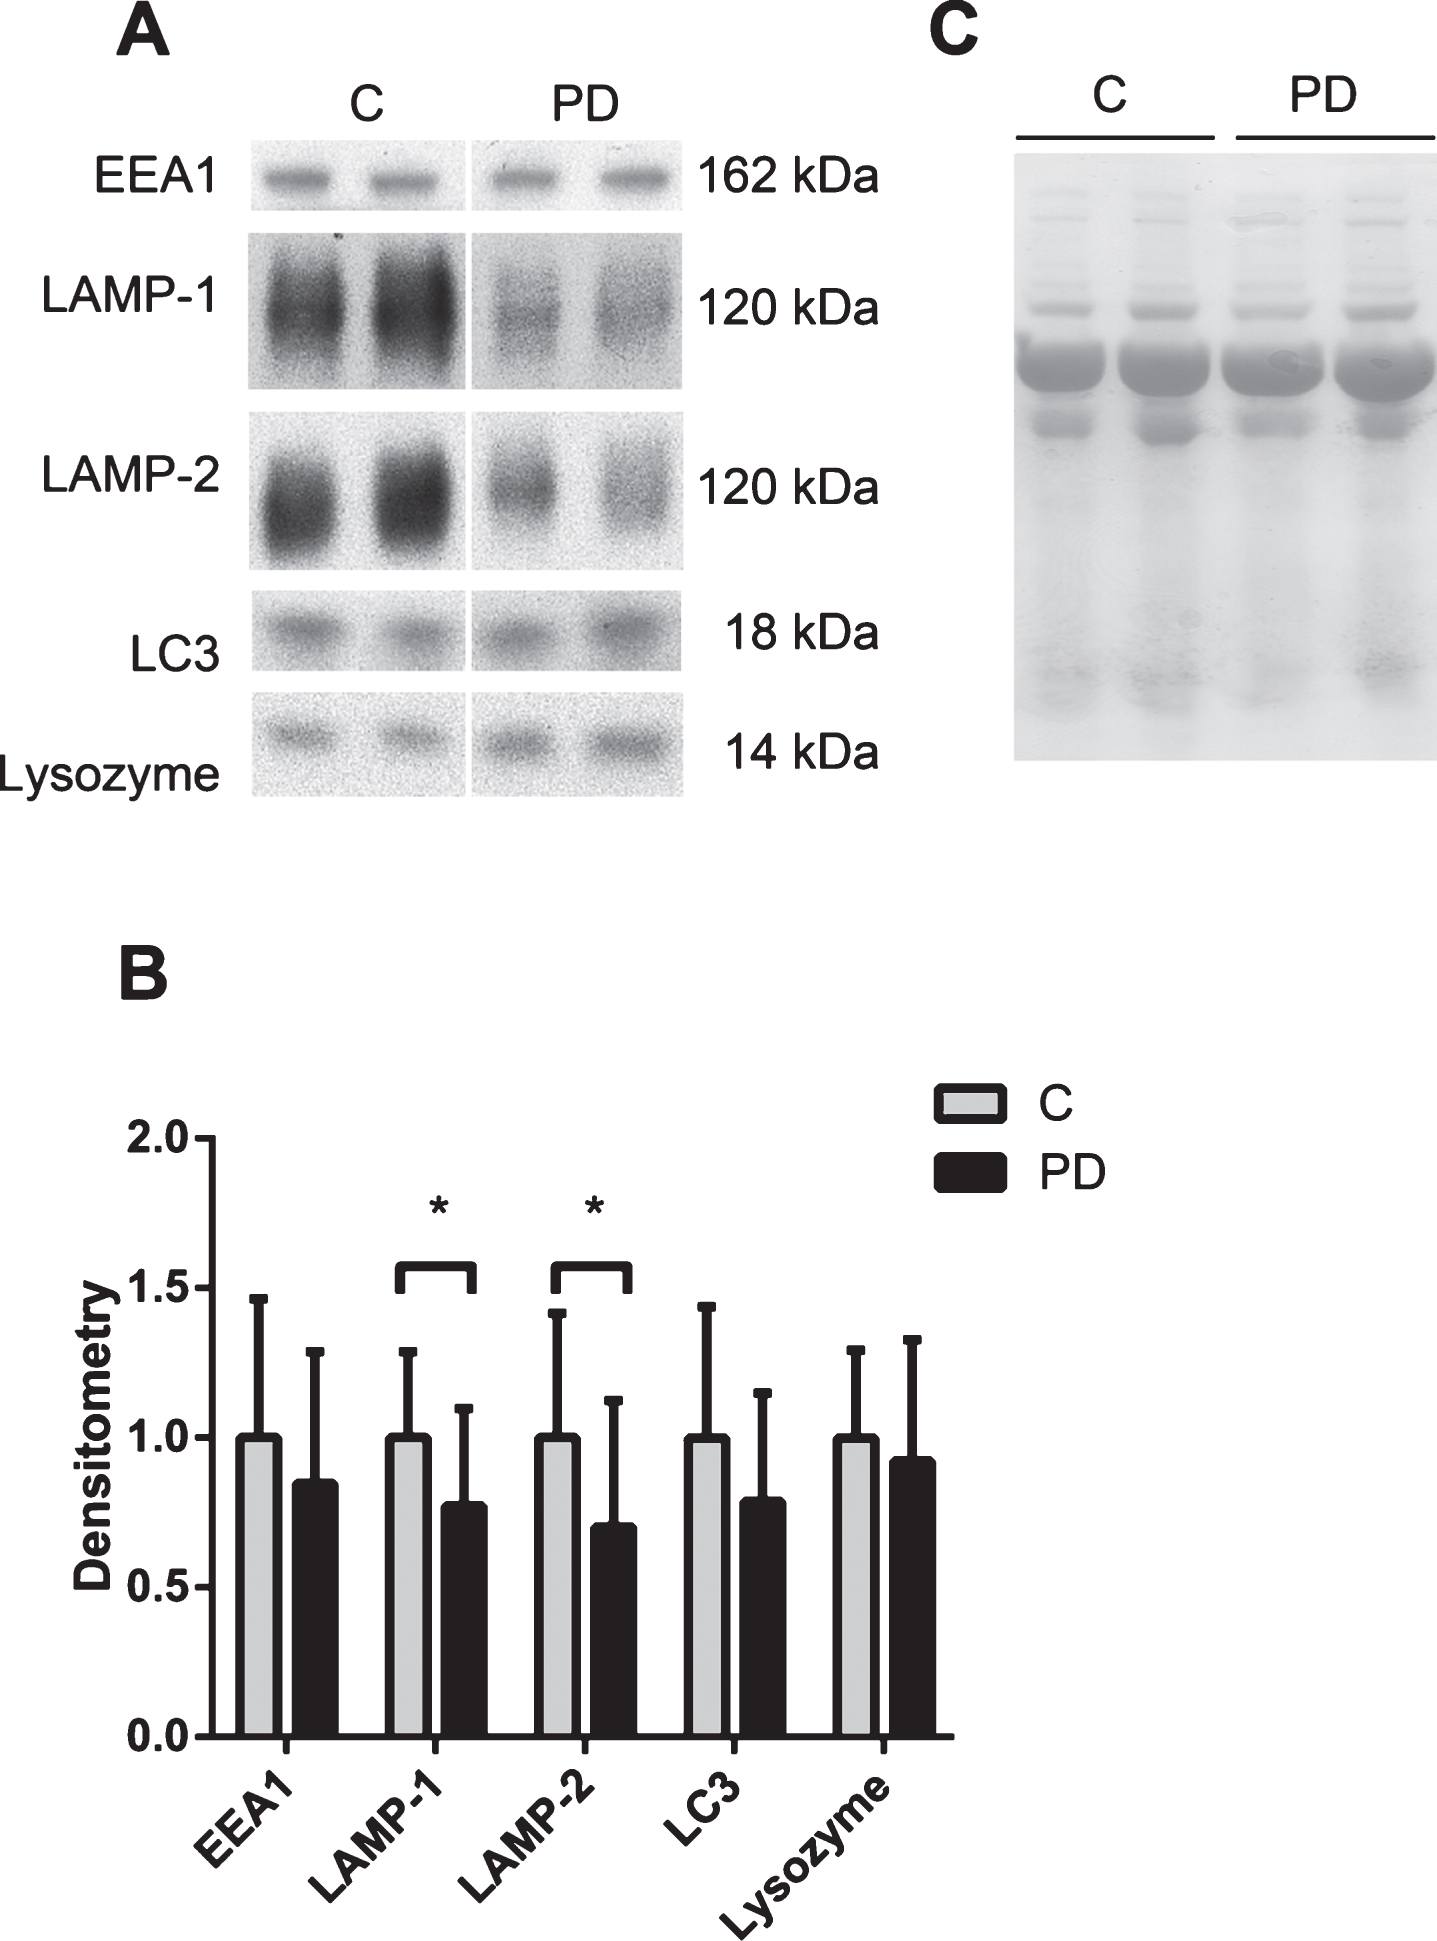 The lysosomal network proteins LAMP-1 and LAMP-2 are downregulated in the CSF of PD patients. A) Representative samples from one Western blot of CSF from controls (C) and Parkinson’s disease (PD) patients analyzed for the lysosomal network proteins EEA1, LAMP-1, LAMP-2, LC3 and lysozyme. B) Mean densitometric quantification of the scanned Western blots from C (n = 18) and PD (n = 18) patients. The protein levels are normalized to a standard CSF sample loaded on each gel. C) Equal sample loading was verified by Ponceau S staining of total protein in each lane on the membranes. The bars represent the mean±SD, *p < 0.05.